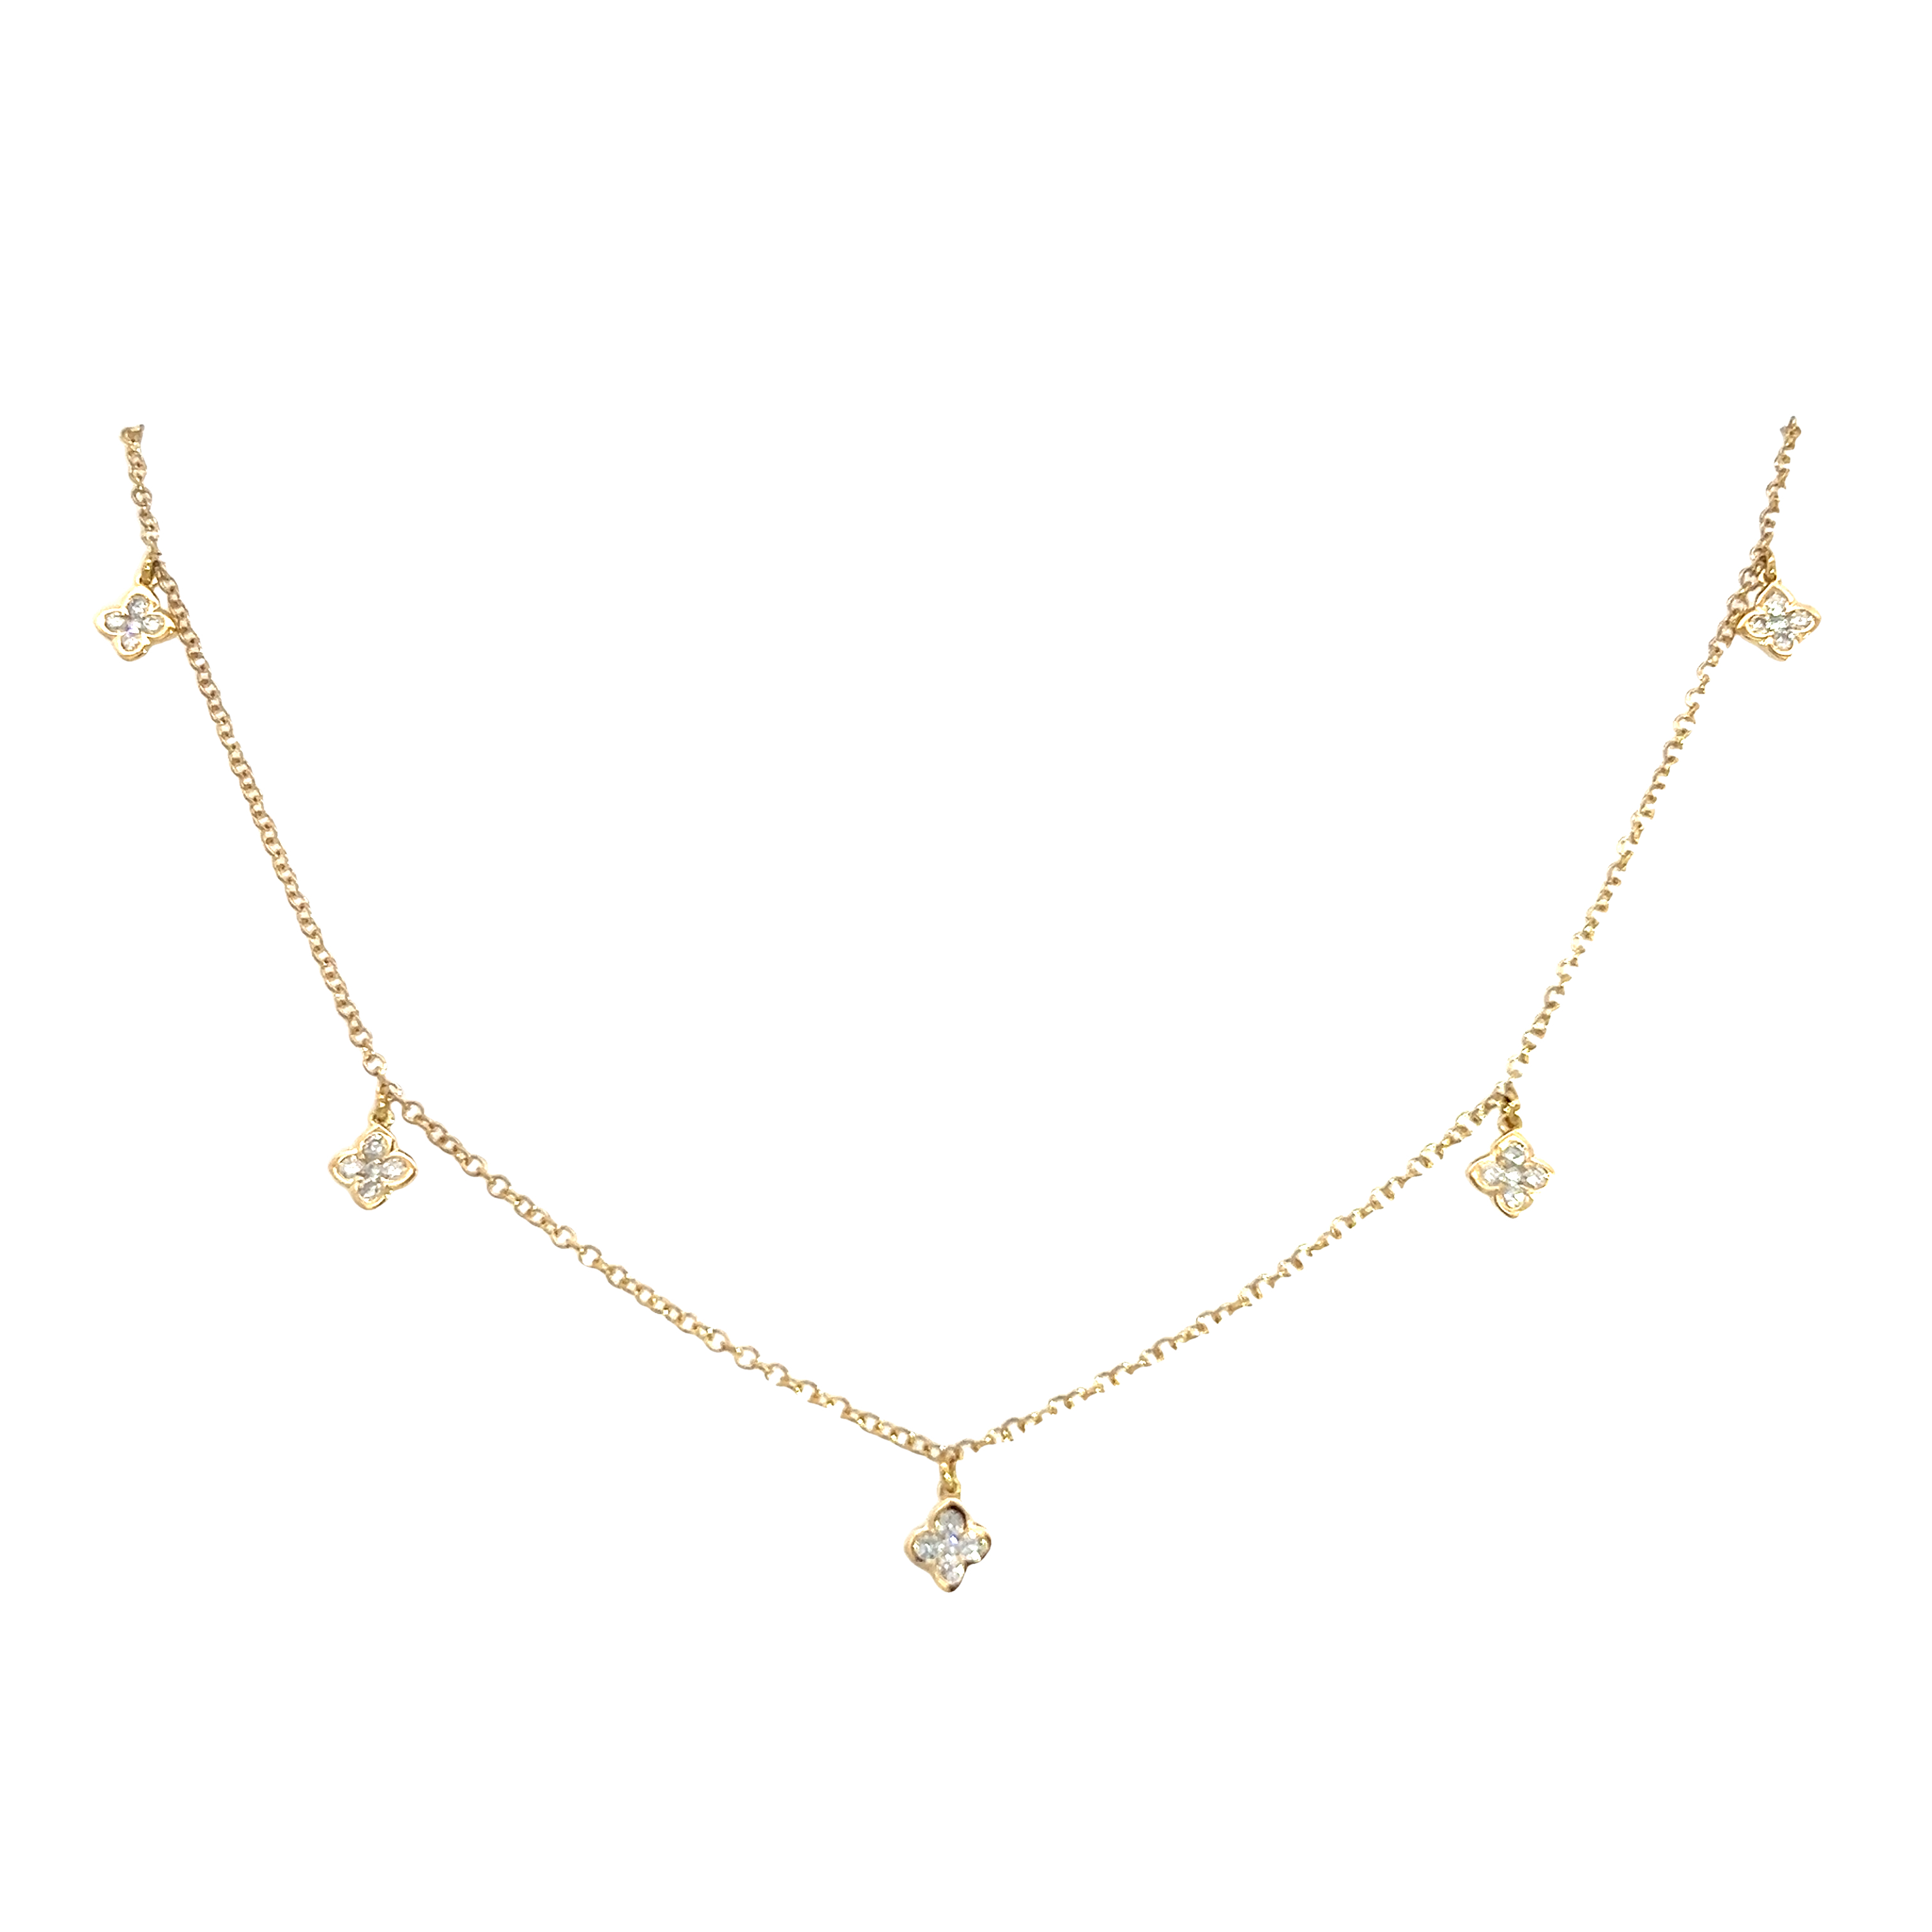 18 Carat Yellow Gold and Diamond Flower Section Necklace